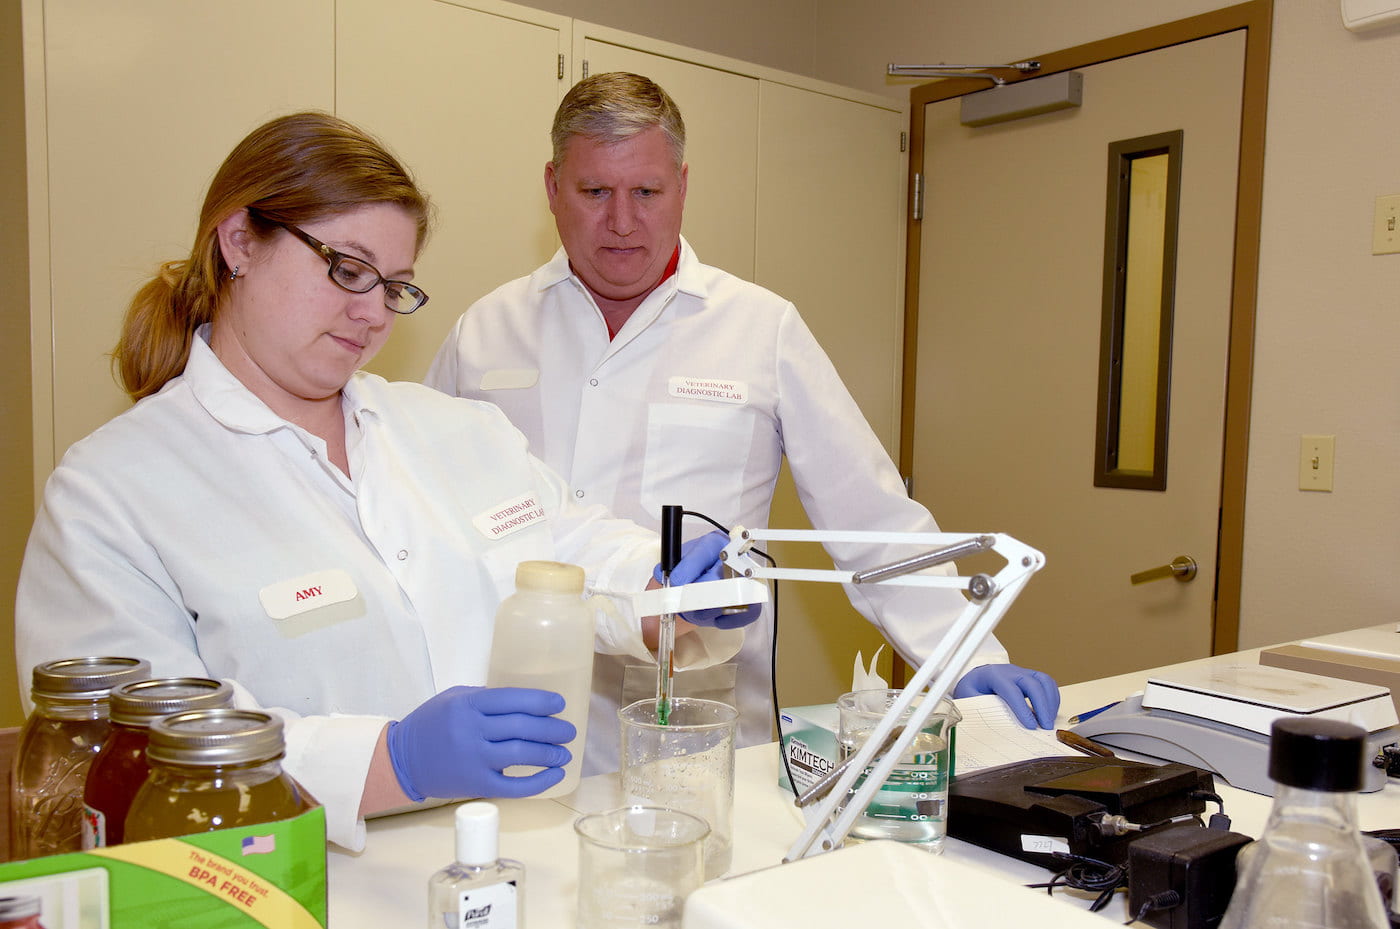 IN THE LAB — Tollett lab Director Randy Moore, DVM, with microbiologist Amy Chapman analyze samples in the Veterinary Diagnostic Lab. (U of A System Division of Agriculture file photo)